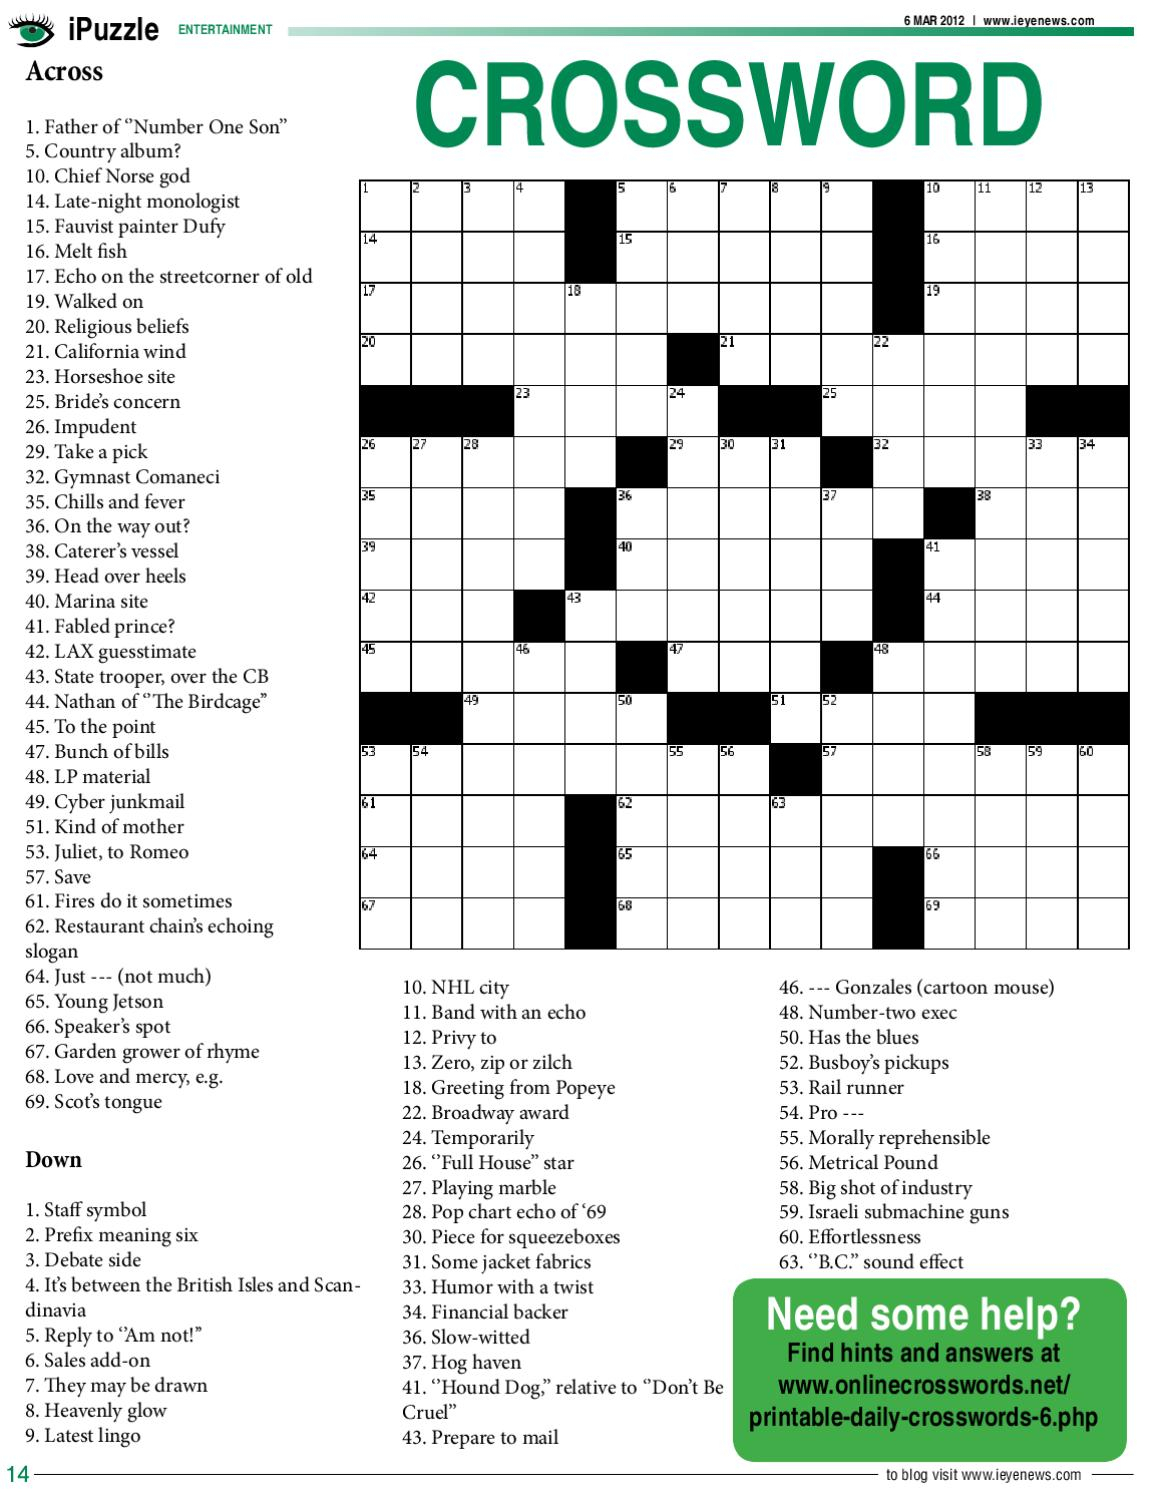 free online crossword puzzles dictionary